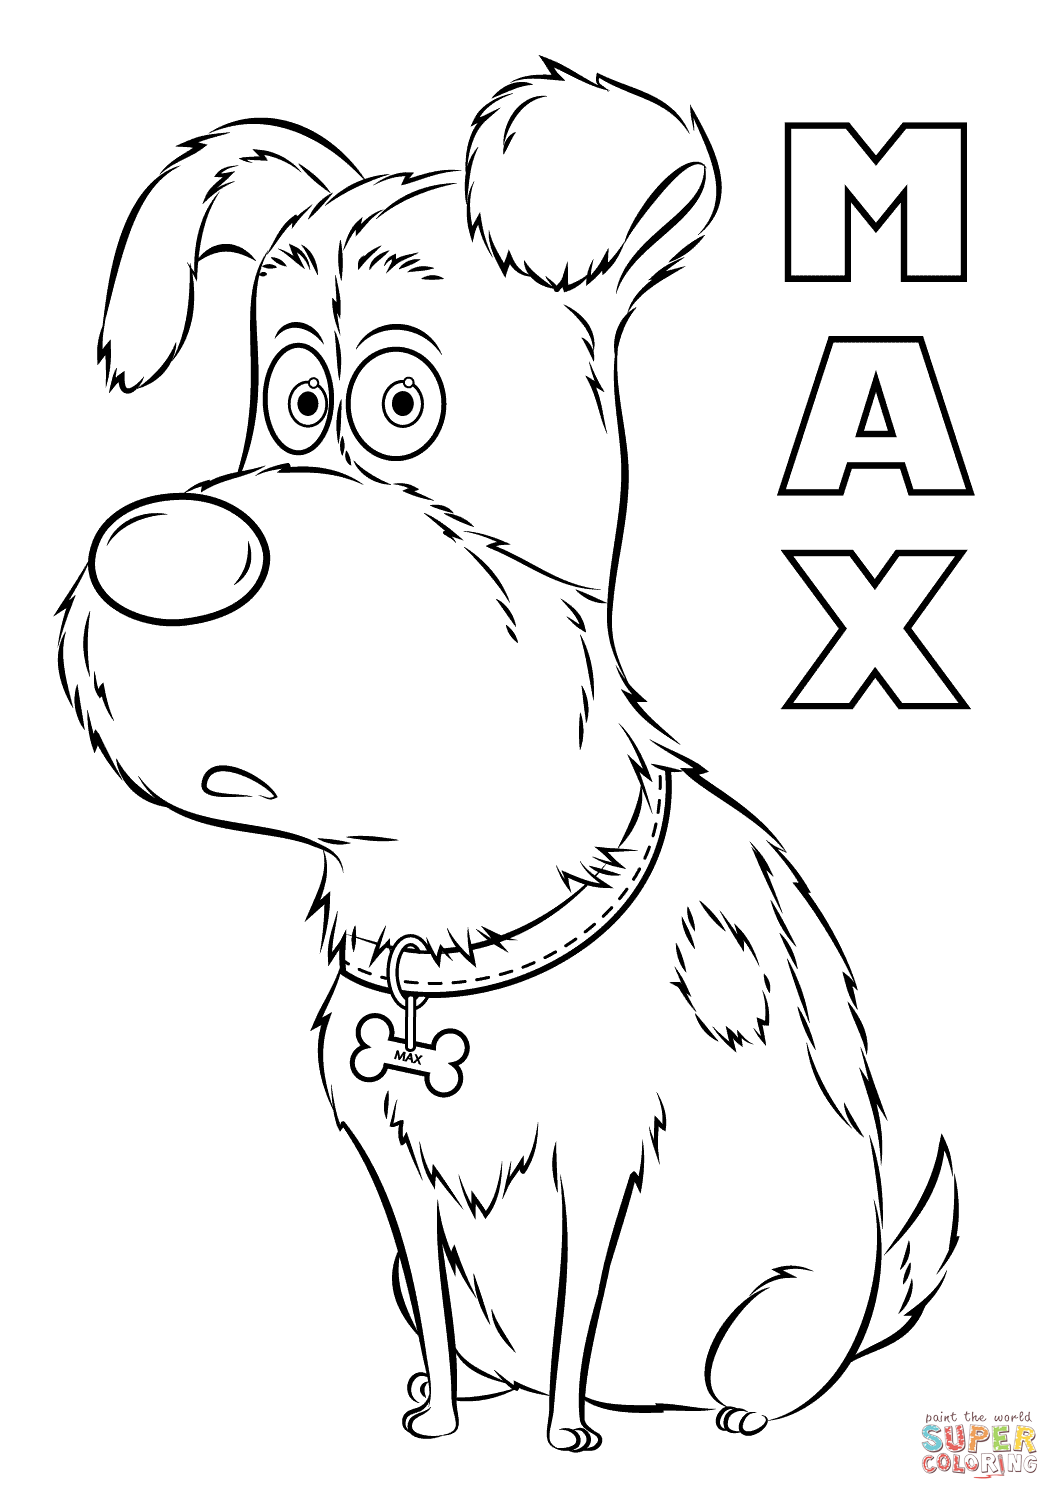 Max from the secret life of pets coloring page free printable coloring pages